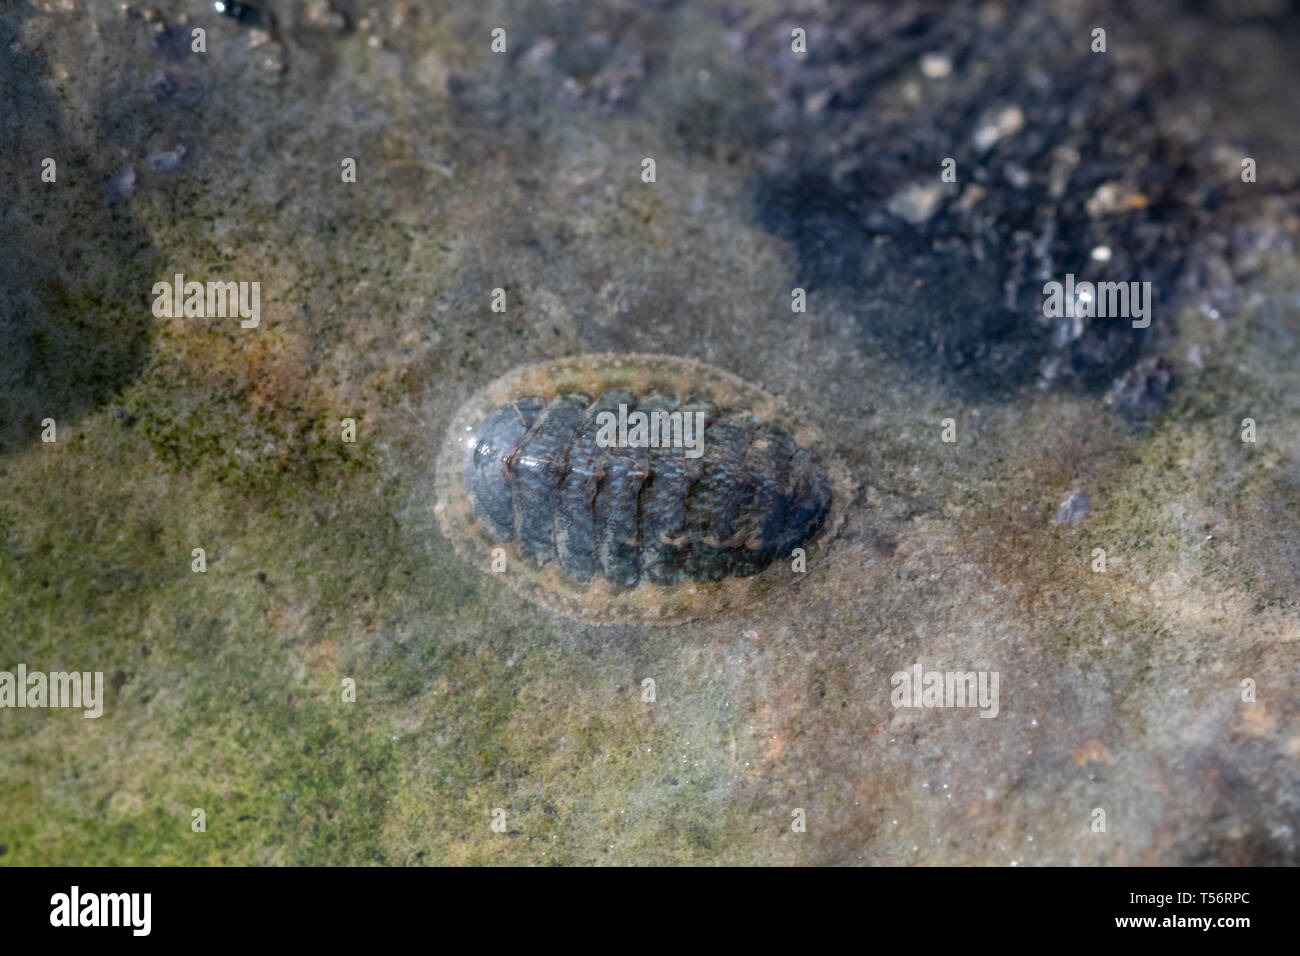 Close-up of a chiton (Acanthochitona sp.) attached to a rock, a species of marine wildlife, UK Stock Photo